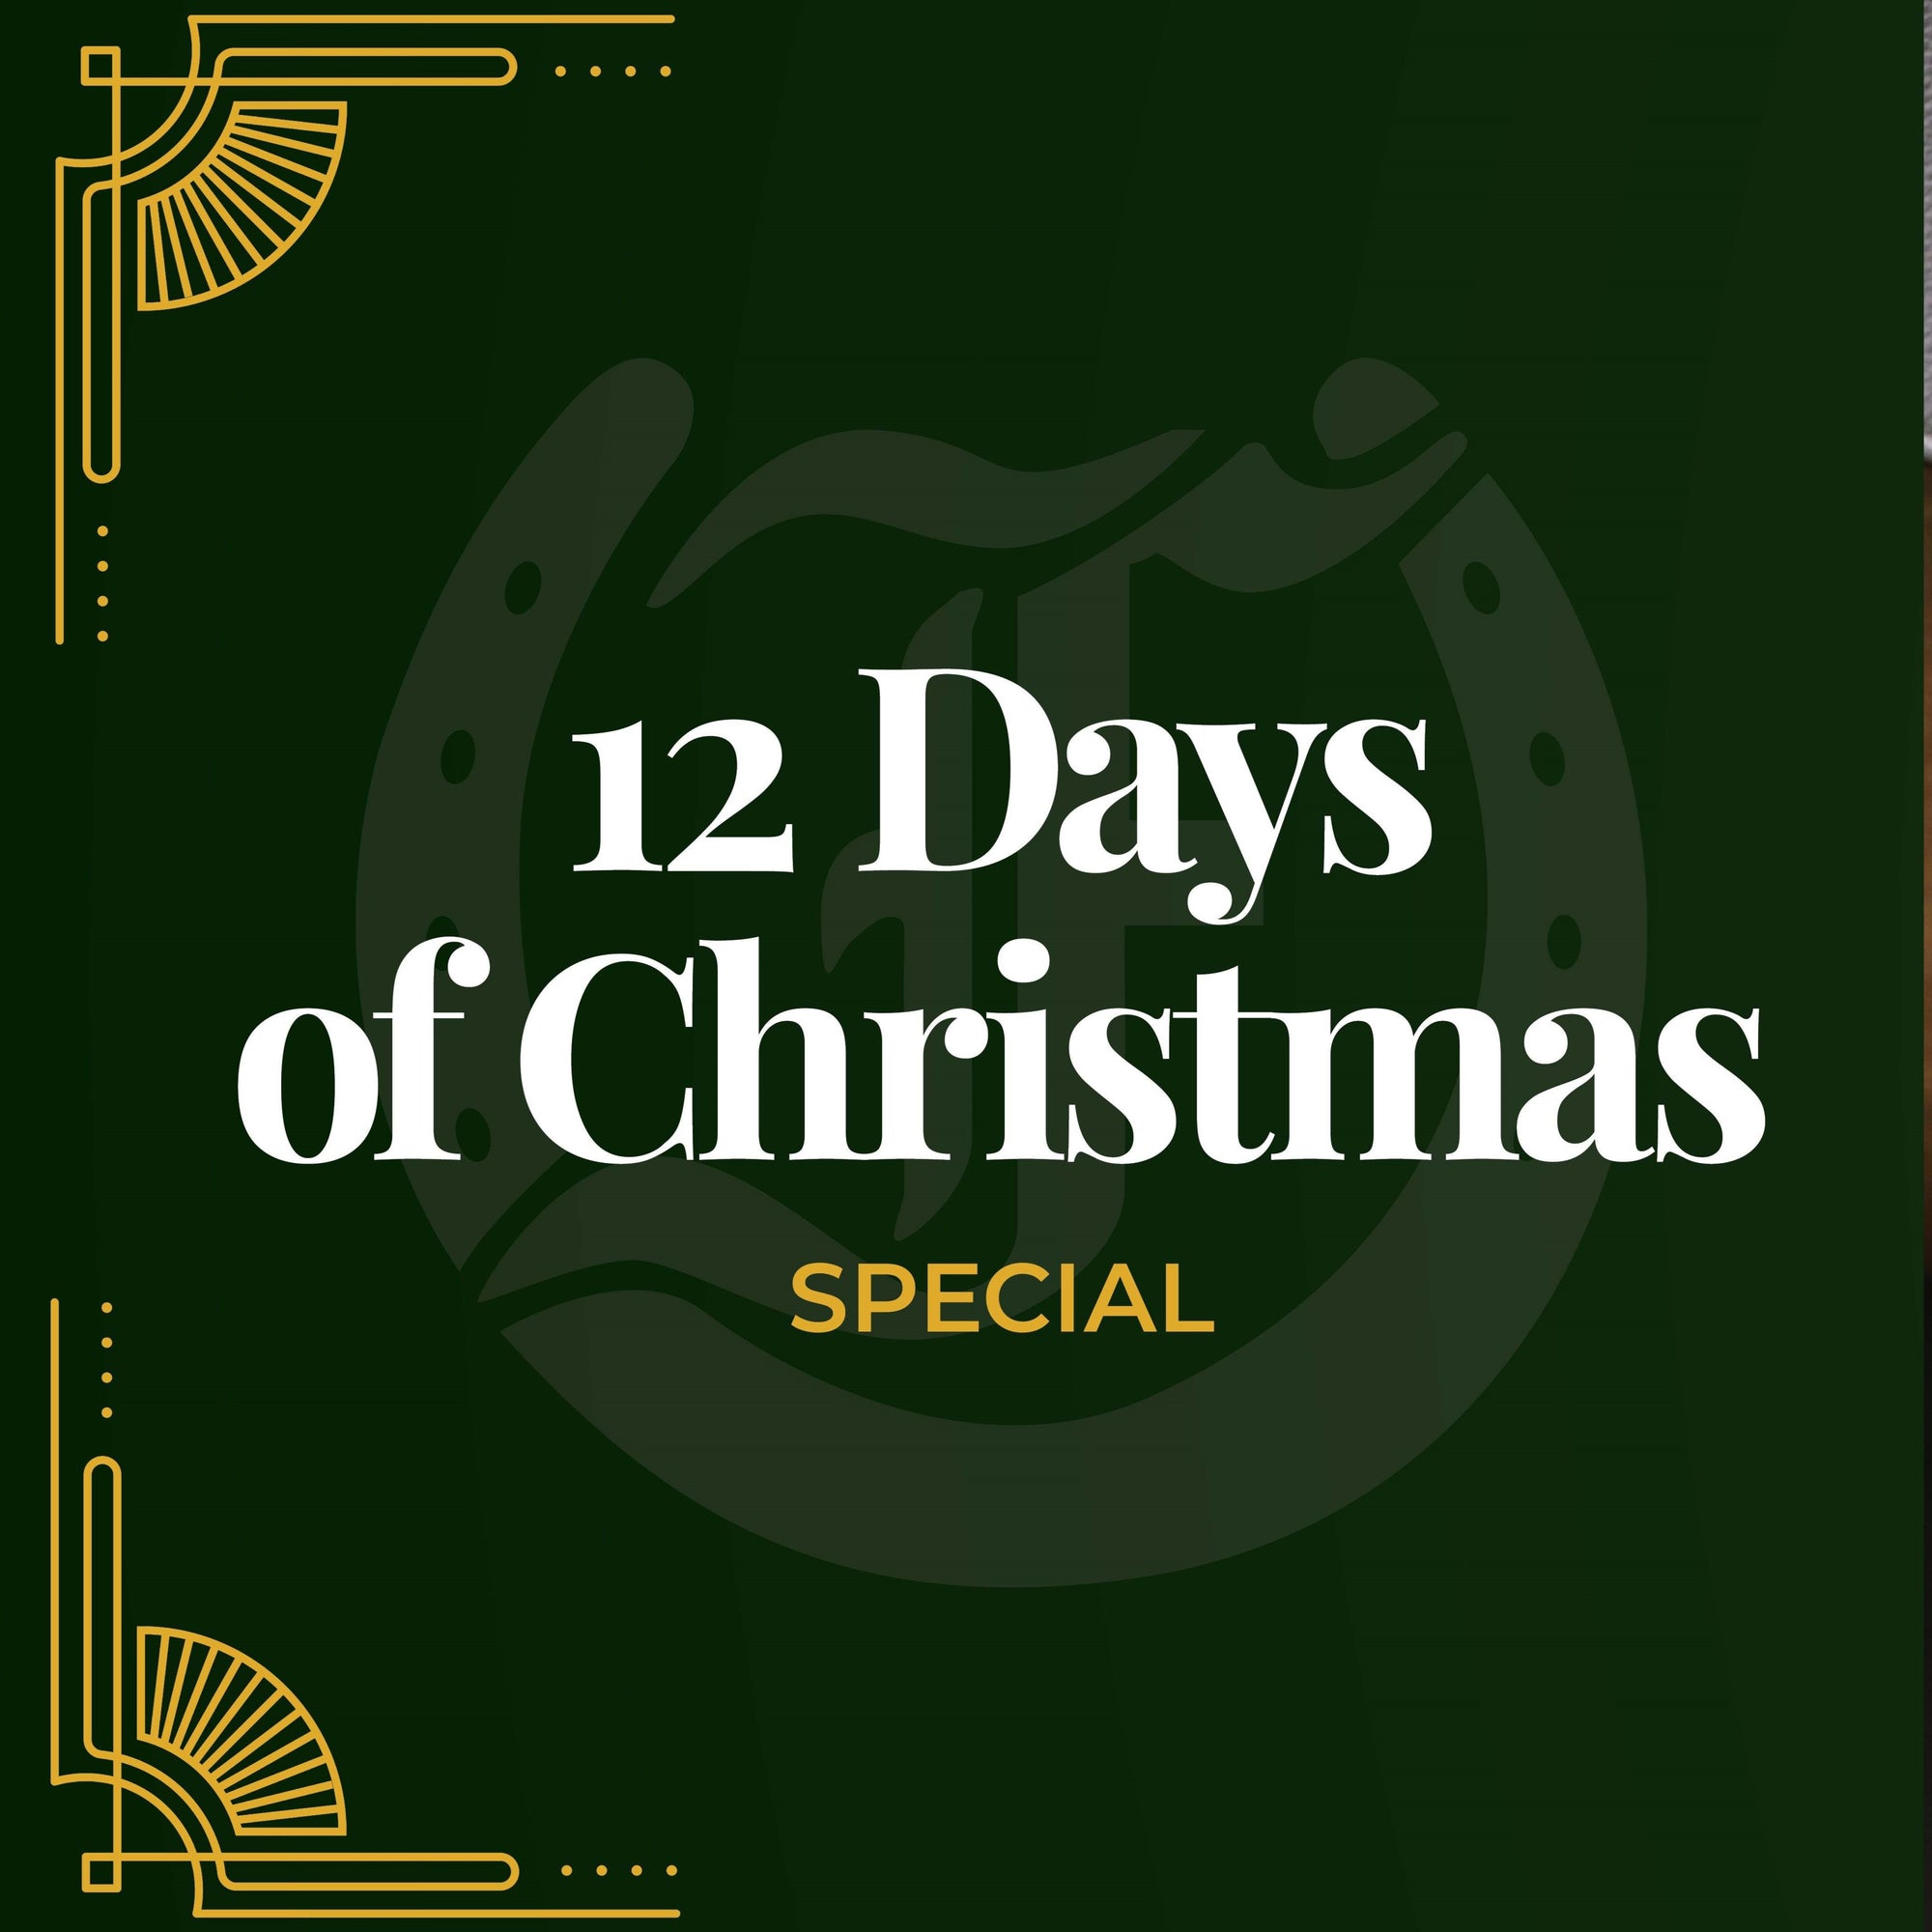 Freedman’s 12 Days of Christmas: 12 Days of Specials, Gifting & Merry-making